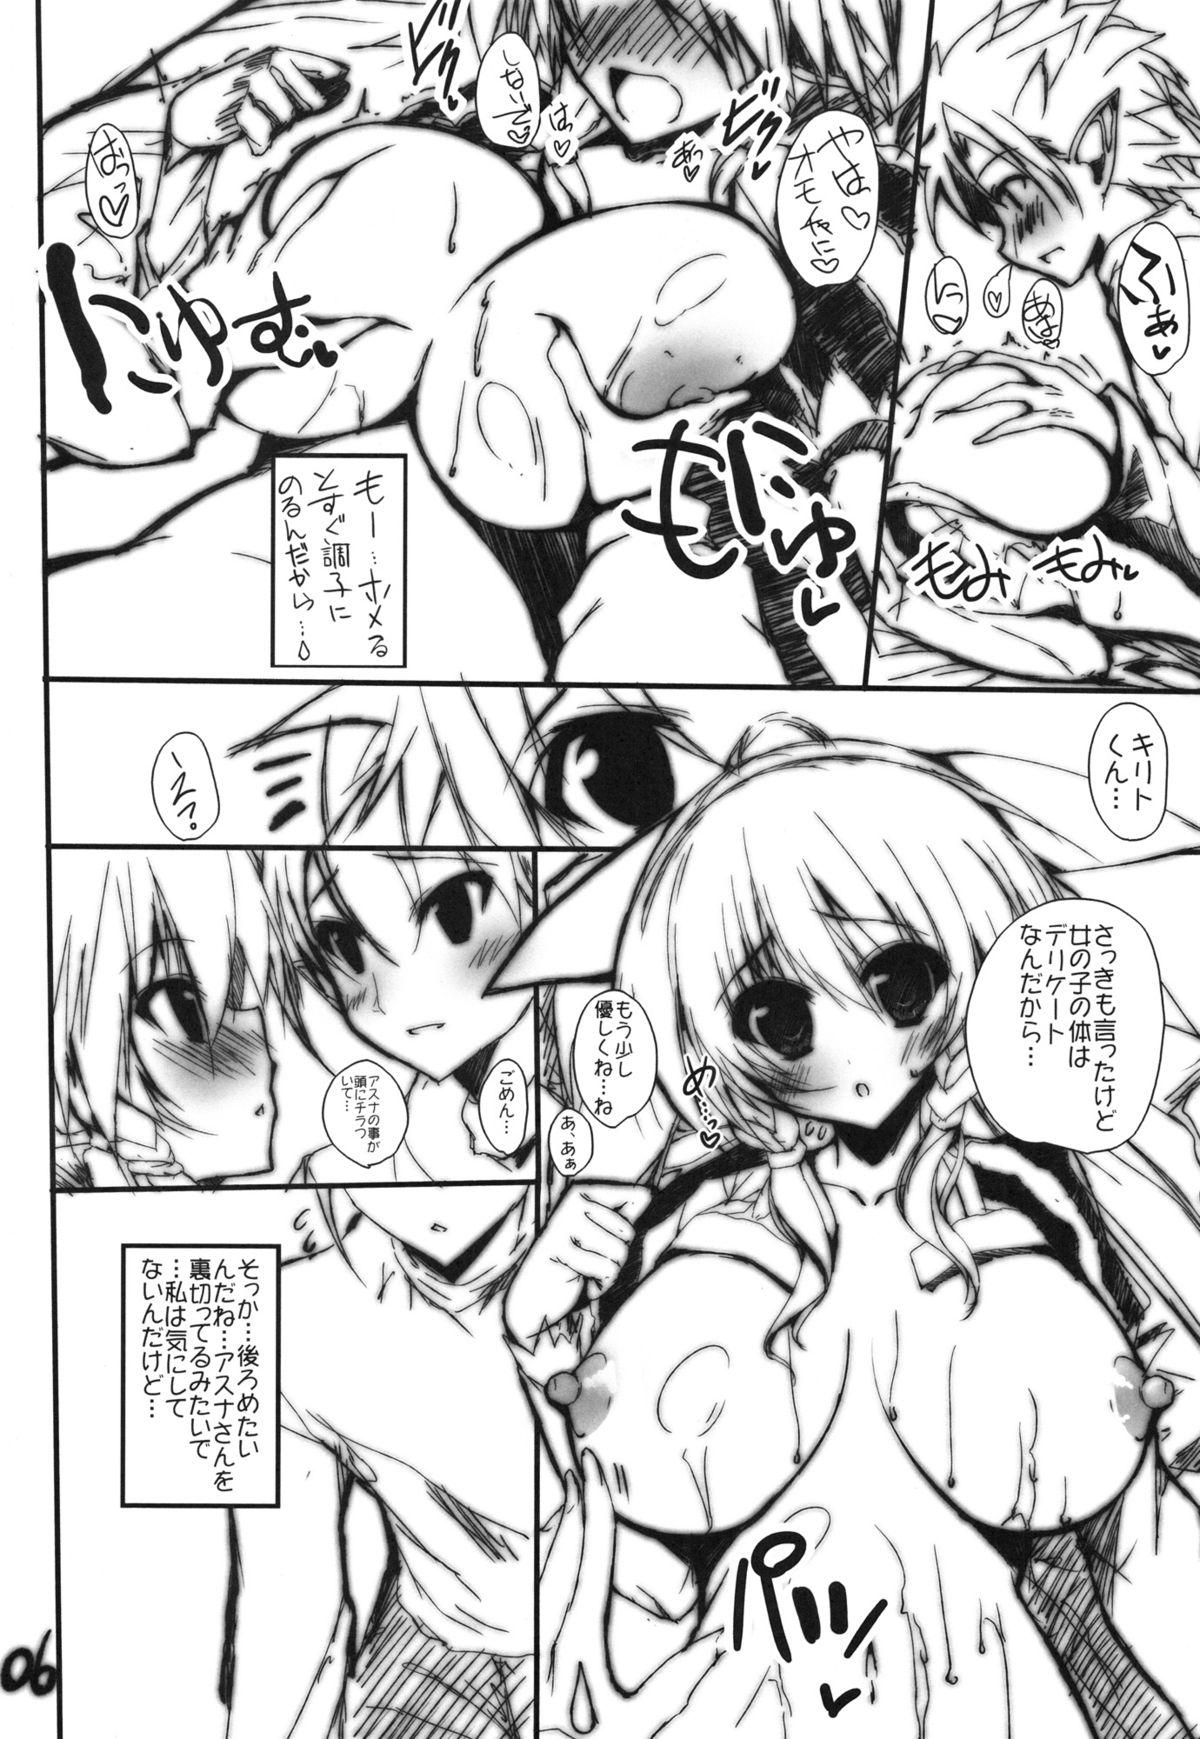 Bus K.S.G Vol.3 - Sword art online Hairy Pussy - Page 5